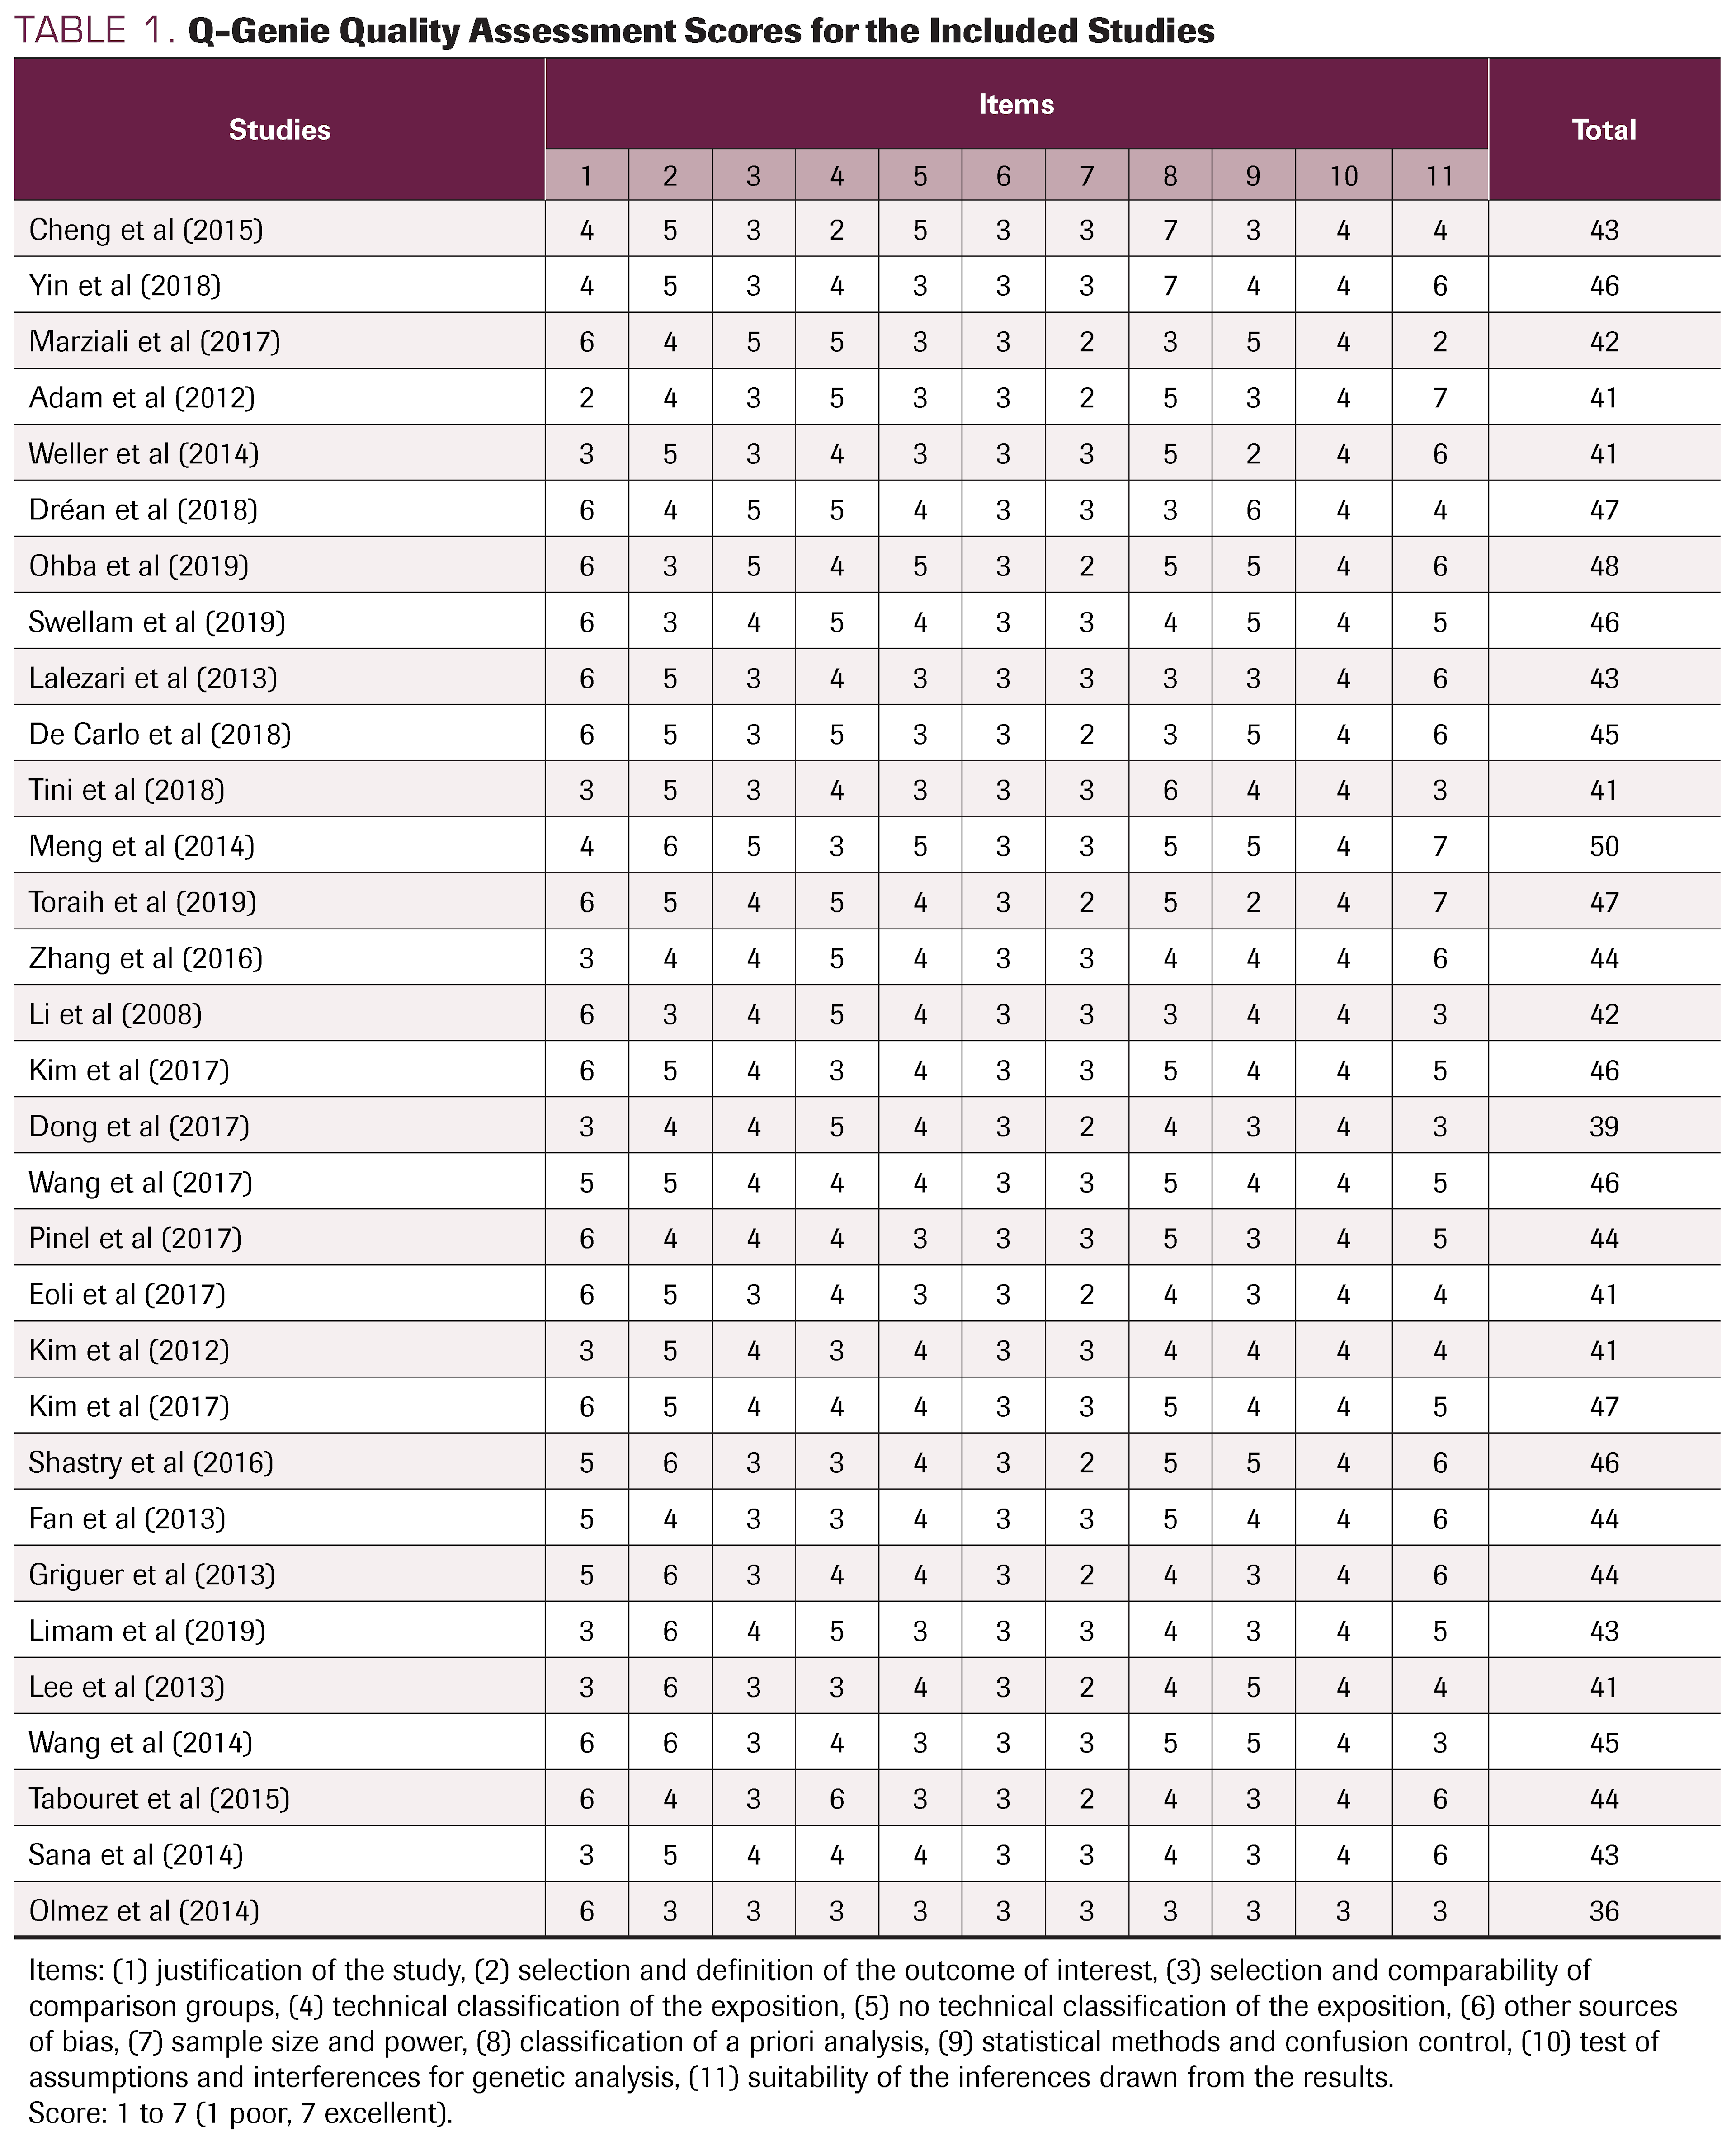 TABLE 1. Q-Genie Quality Assessment Scores for the Included Studies